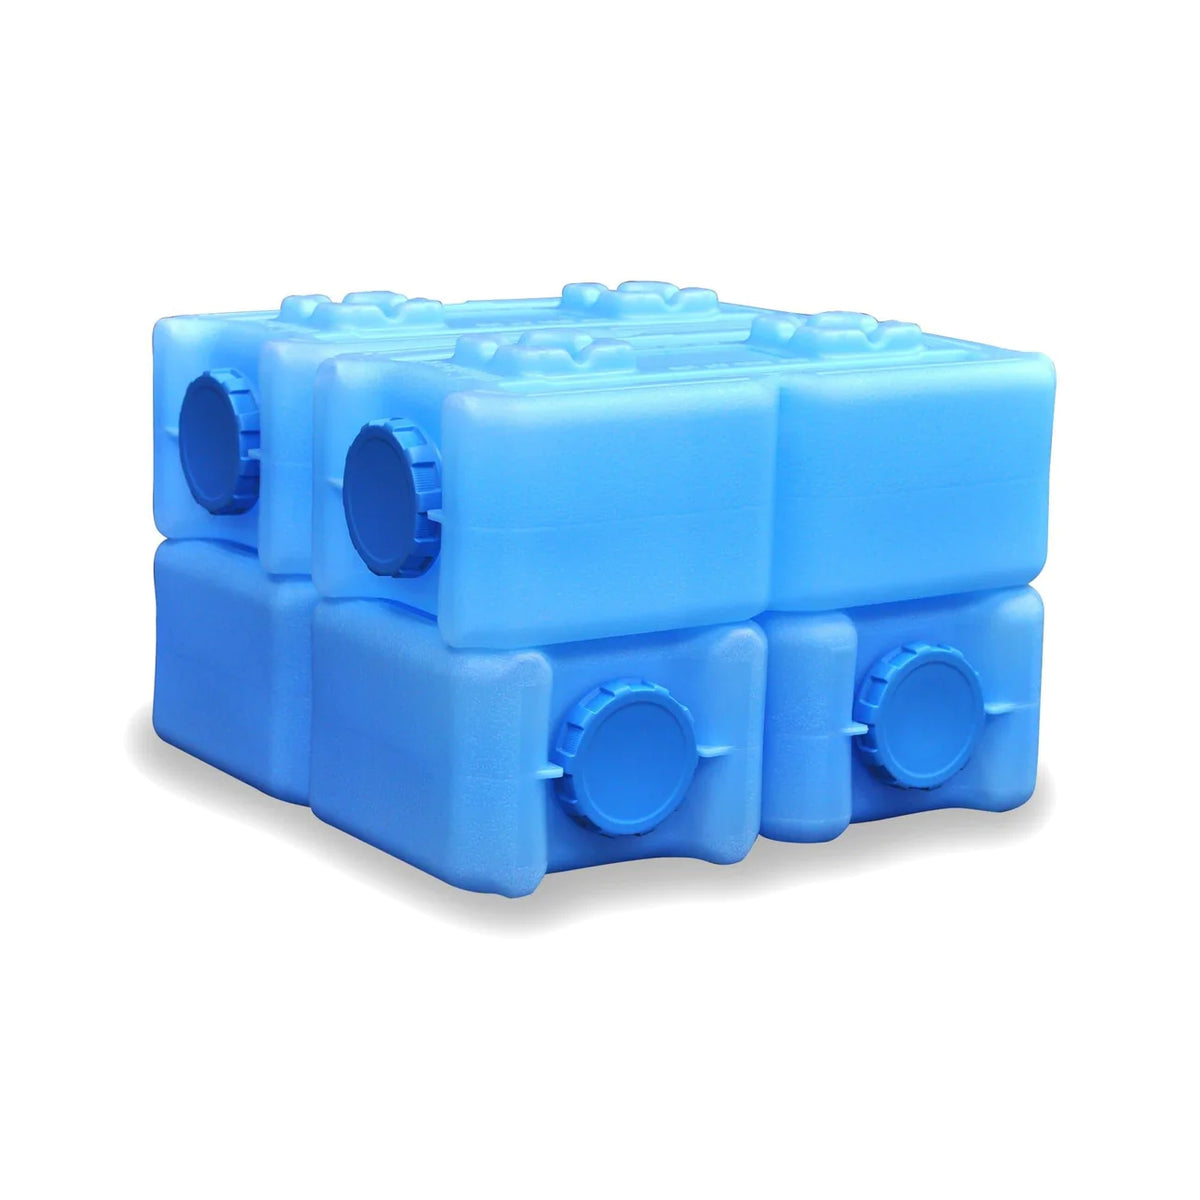 http://preparedplanet.com/cdn/shop/files/4-stackable-water-storage-containers-14-gallons-readywise_1296x_915a8c8d-6fe8-495f-9818-7f001cbabbfe_1200x1200.webp?v=1693738554